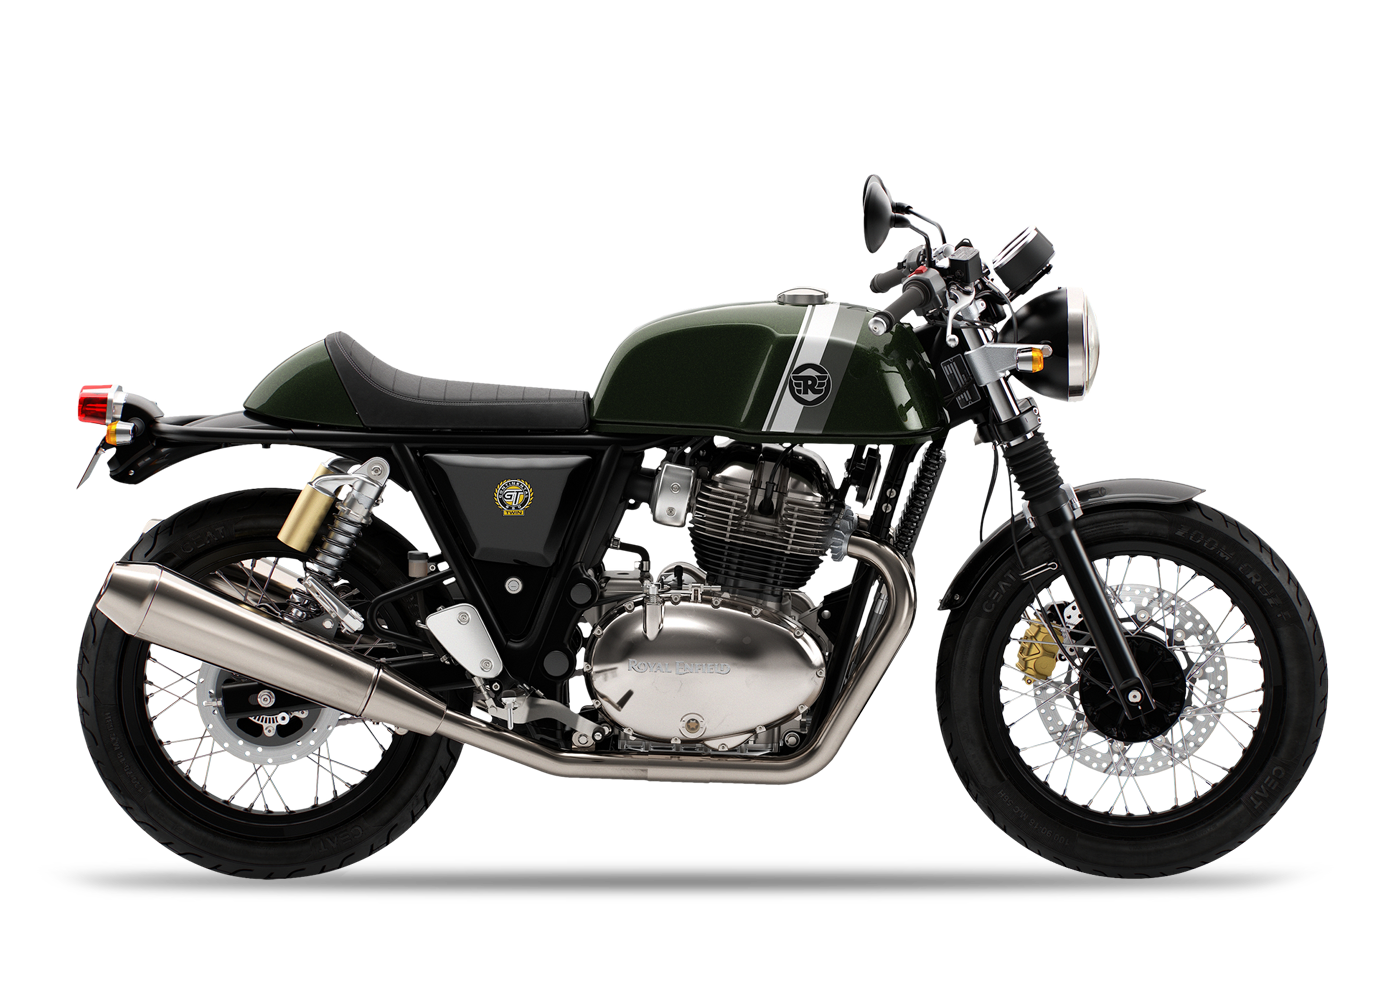 Accessories for Royal Enfield Continental GT 650 designed and made by ADV Tribe